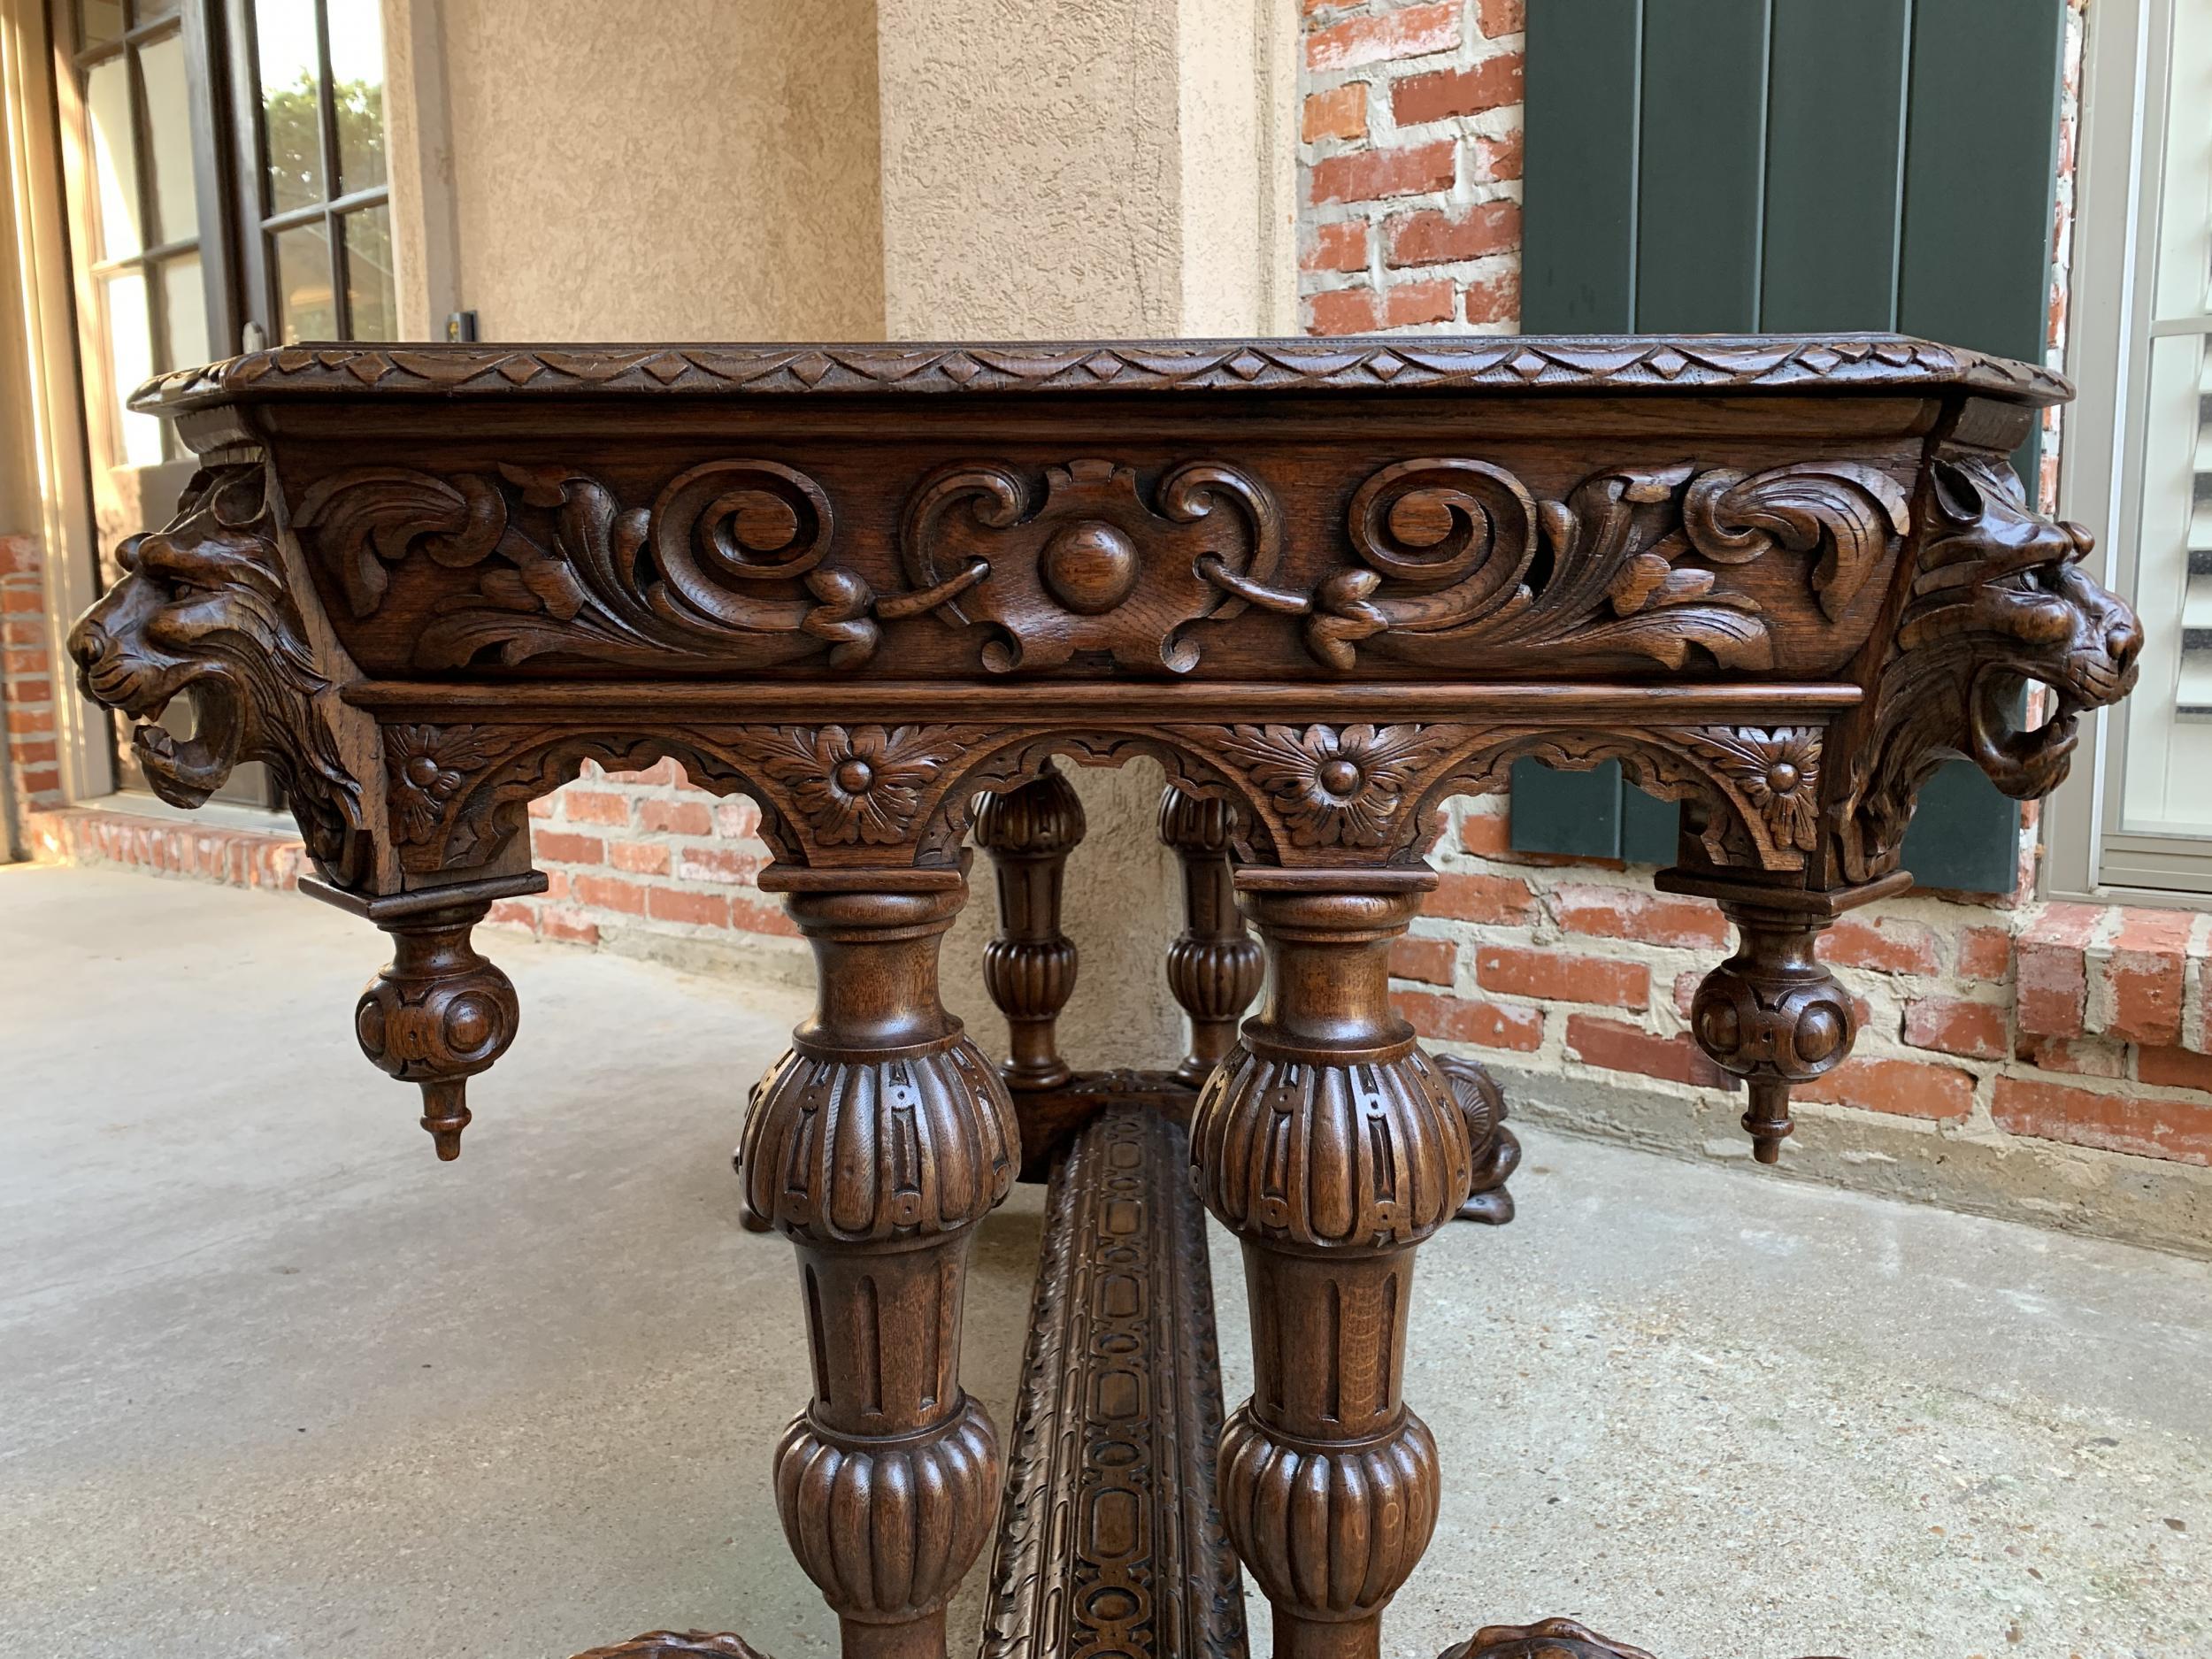 19th century French Carved Oak Desk Sofa Side Table Dolphin Renaissance Gothic 15